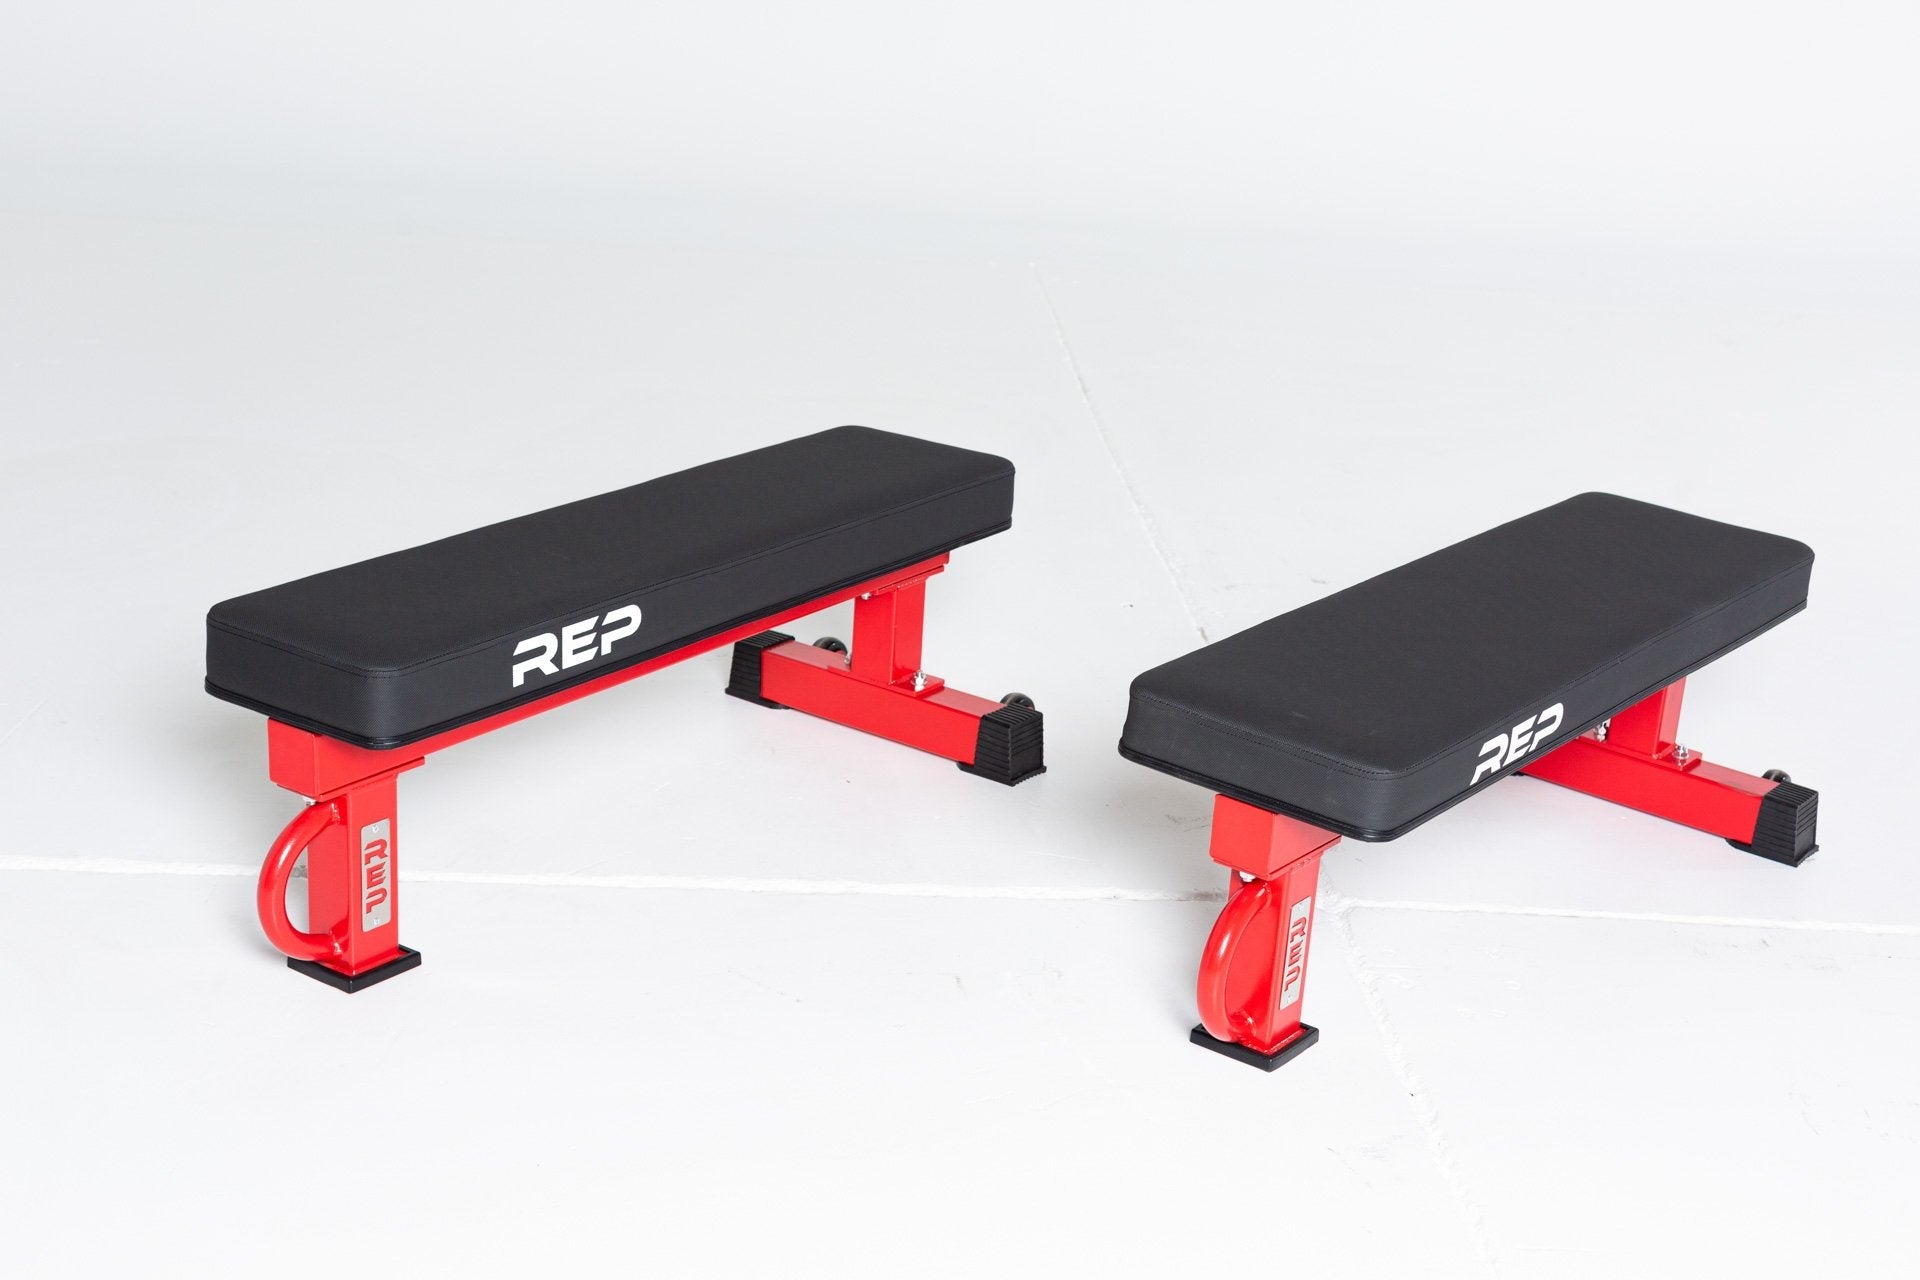 Standard and Wide red FB-5000 benches